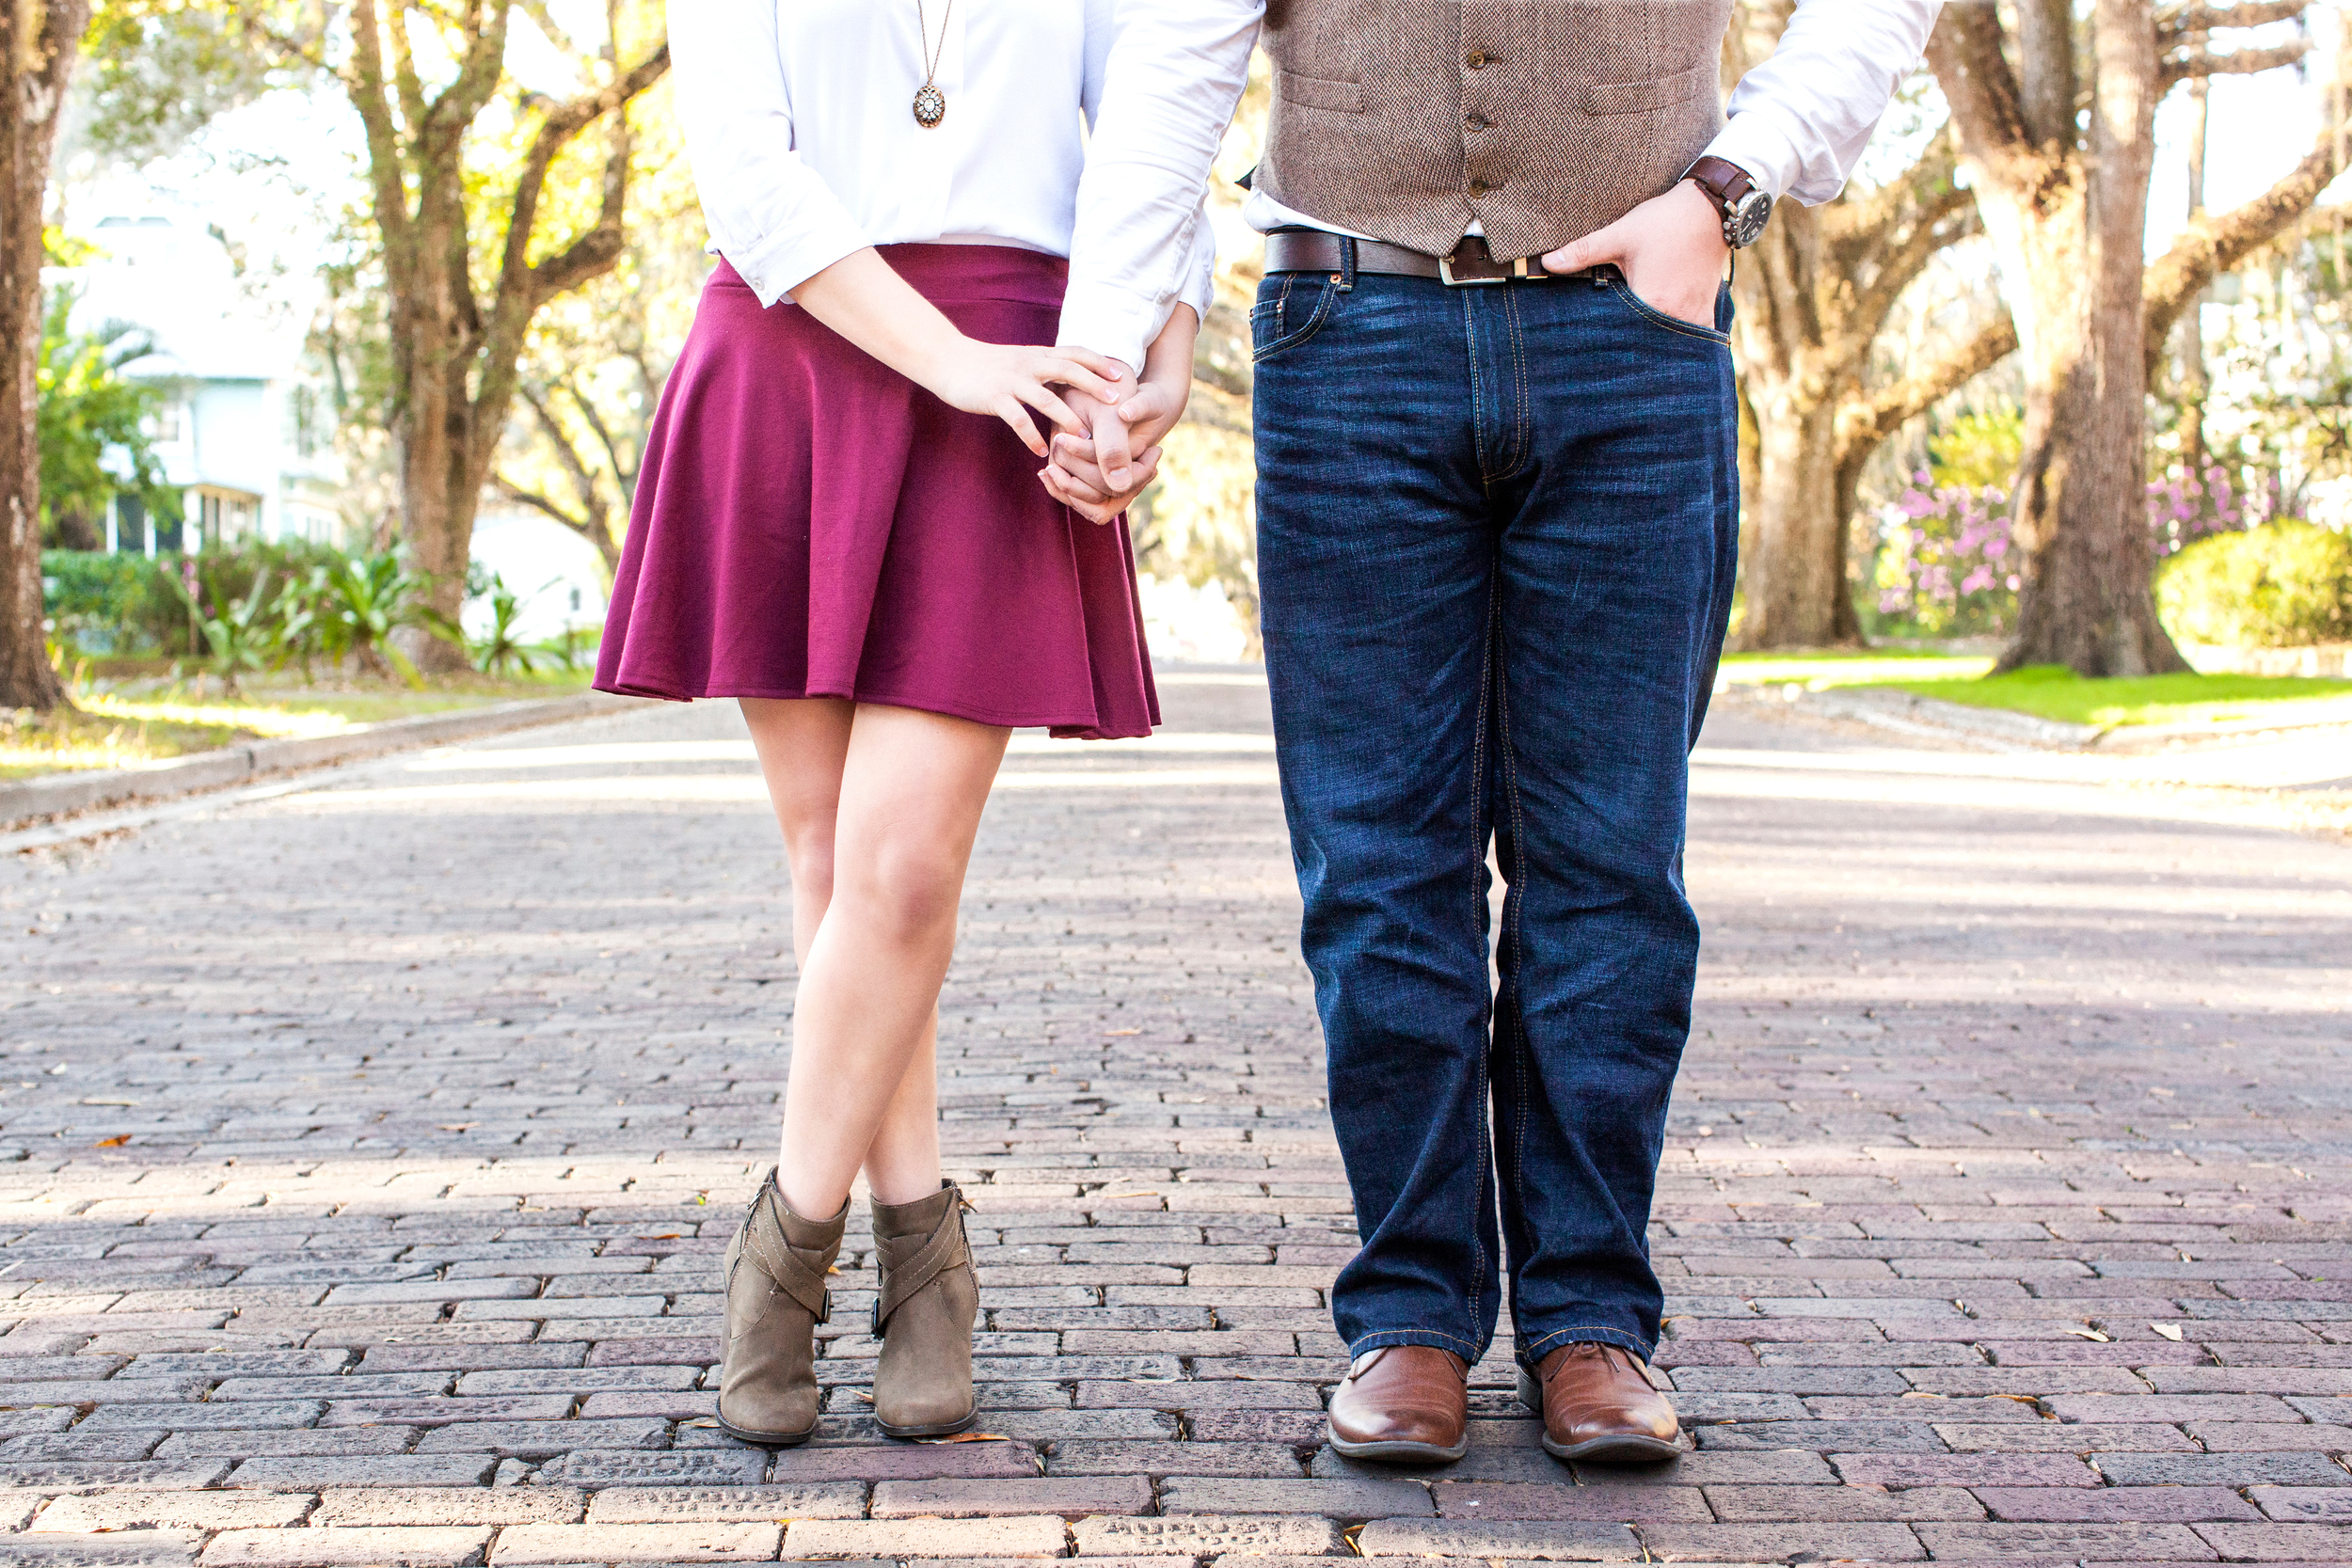 Rebecca Newman Photography Engagement